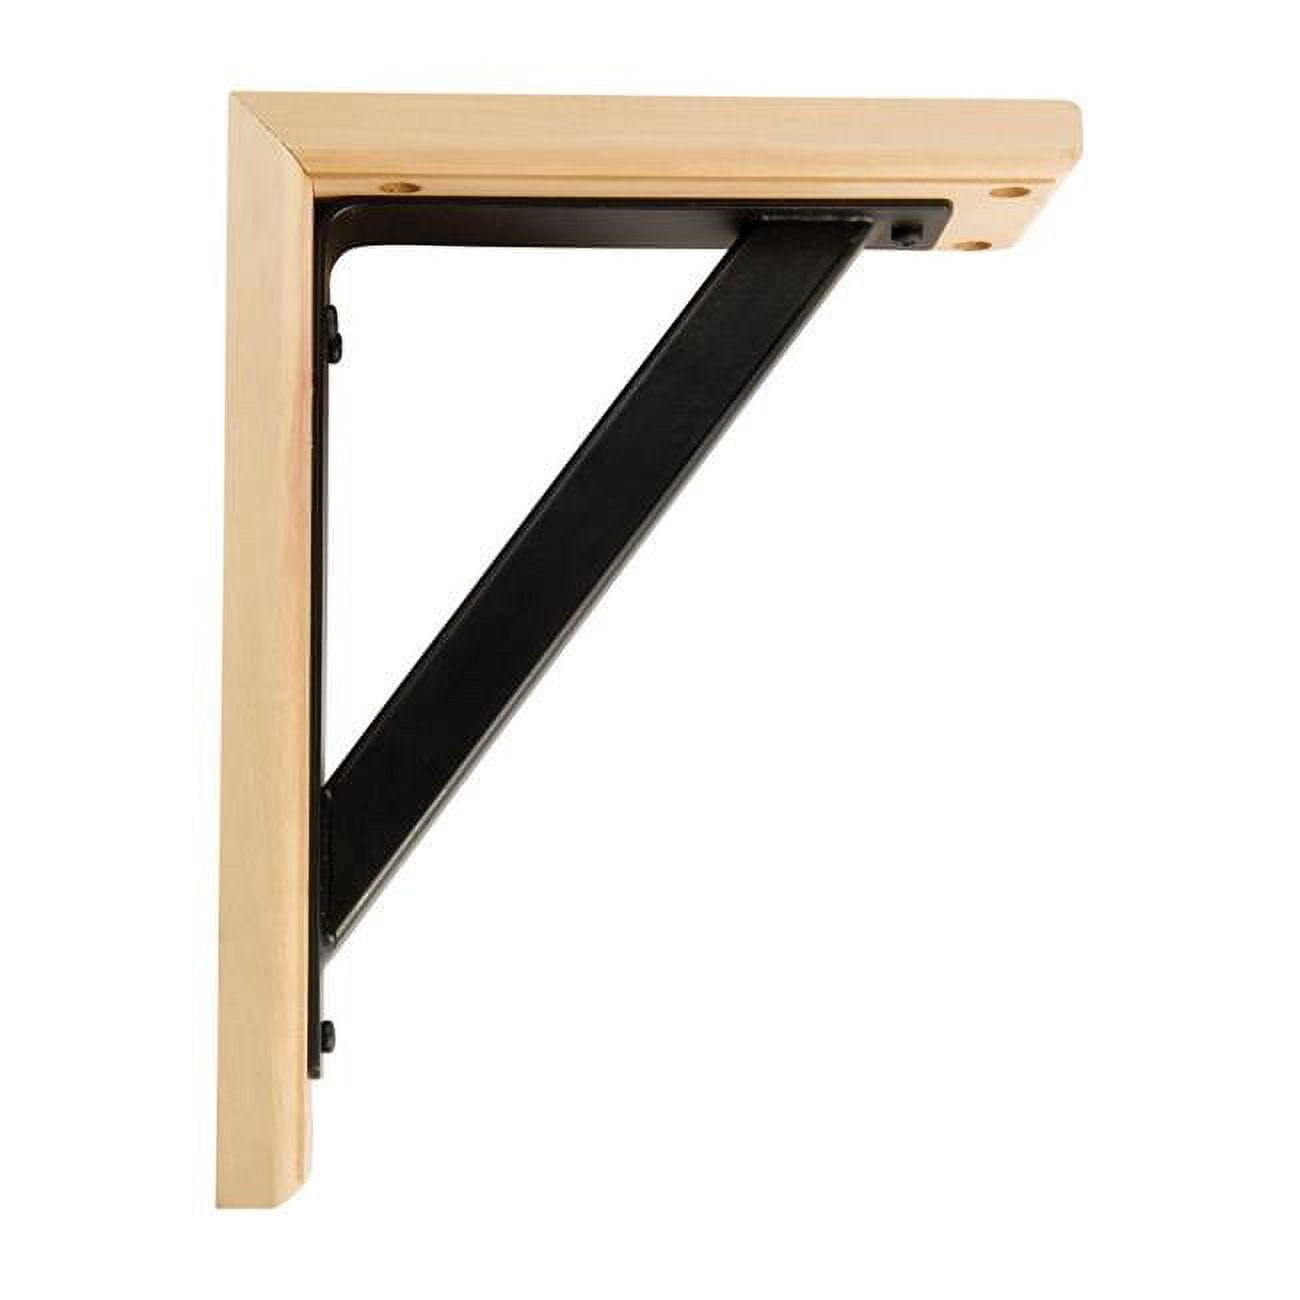 Waddell 5006104 Natural Wood Shelf Support Bracket, 7.85 In. - 5 Lbs